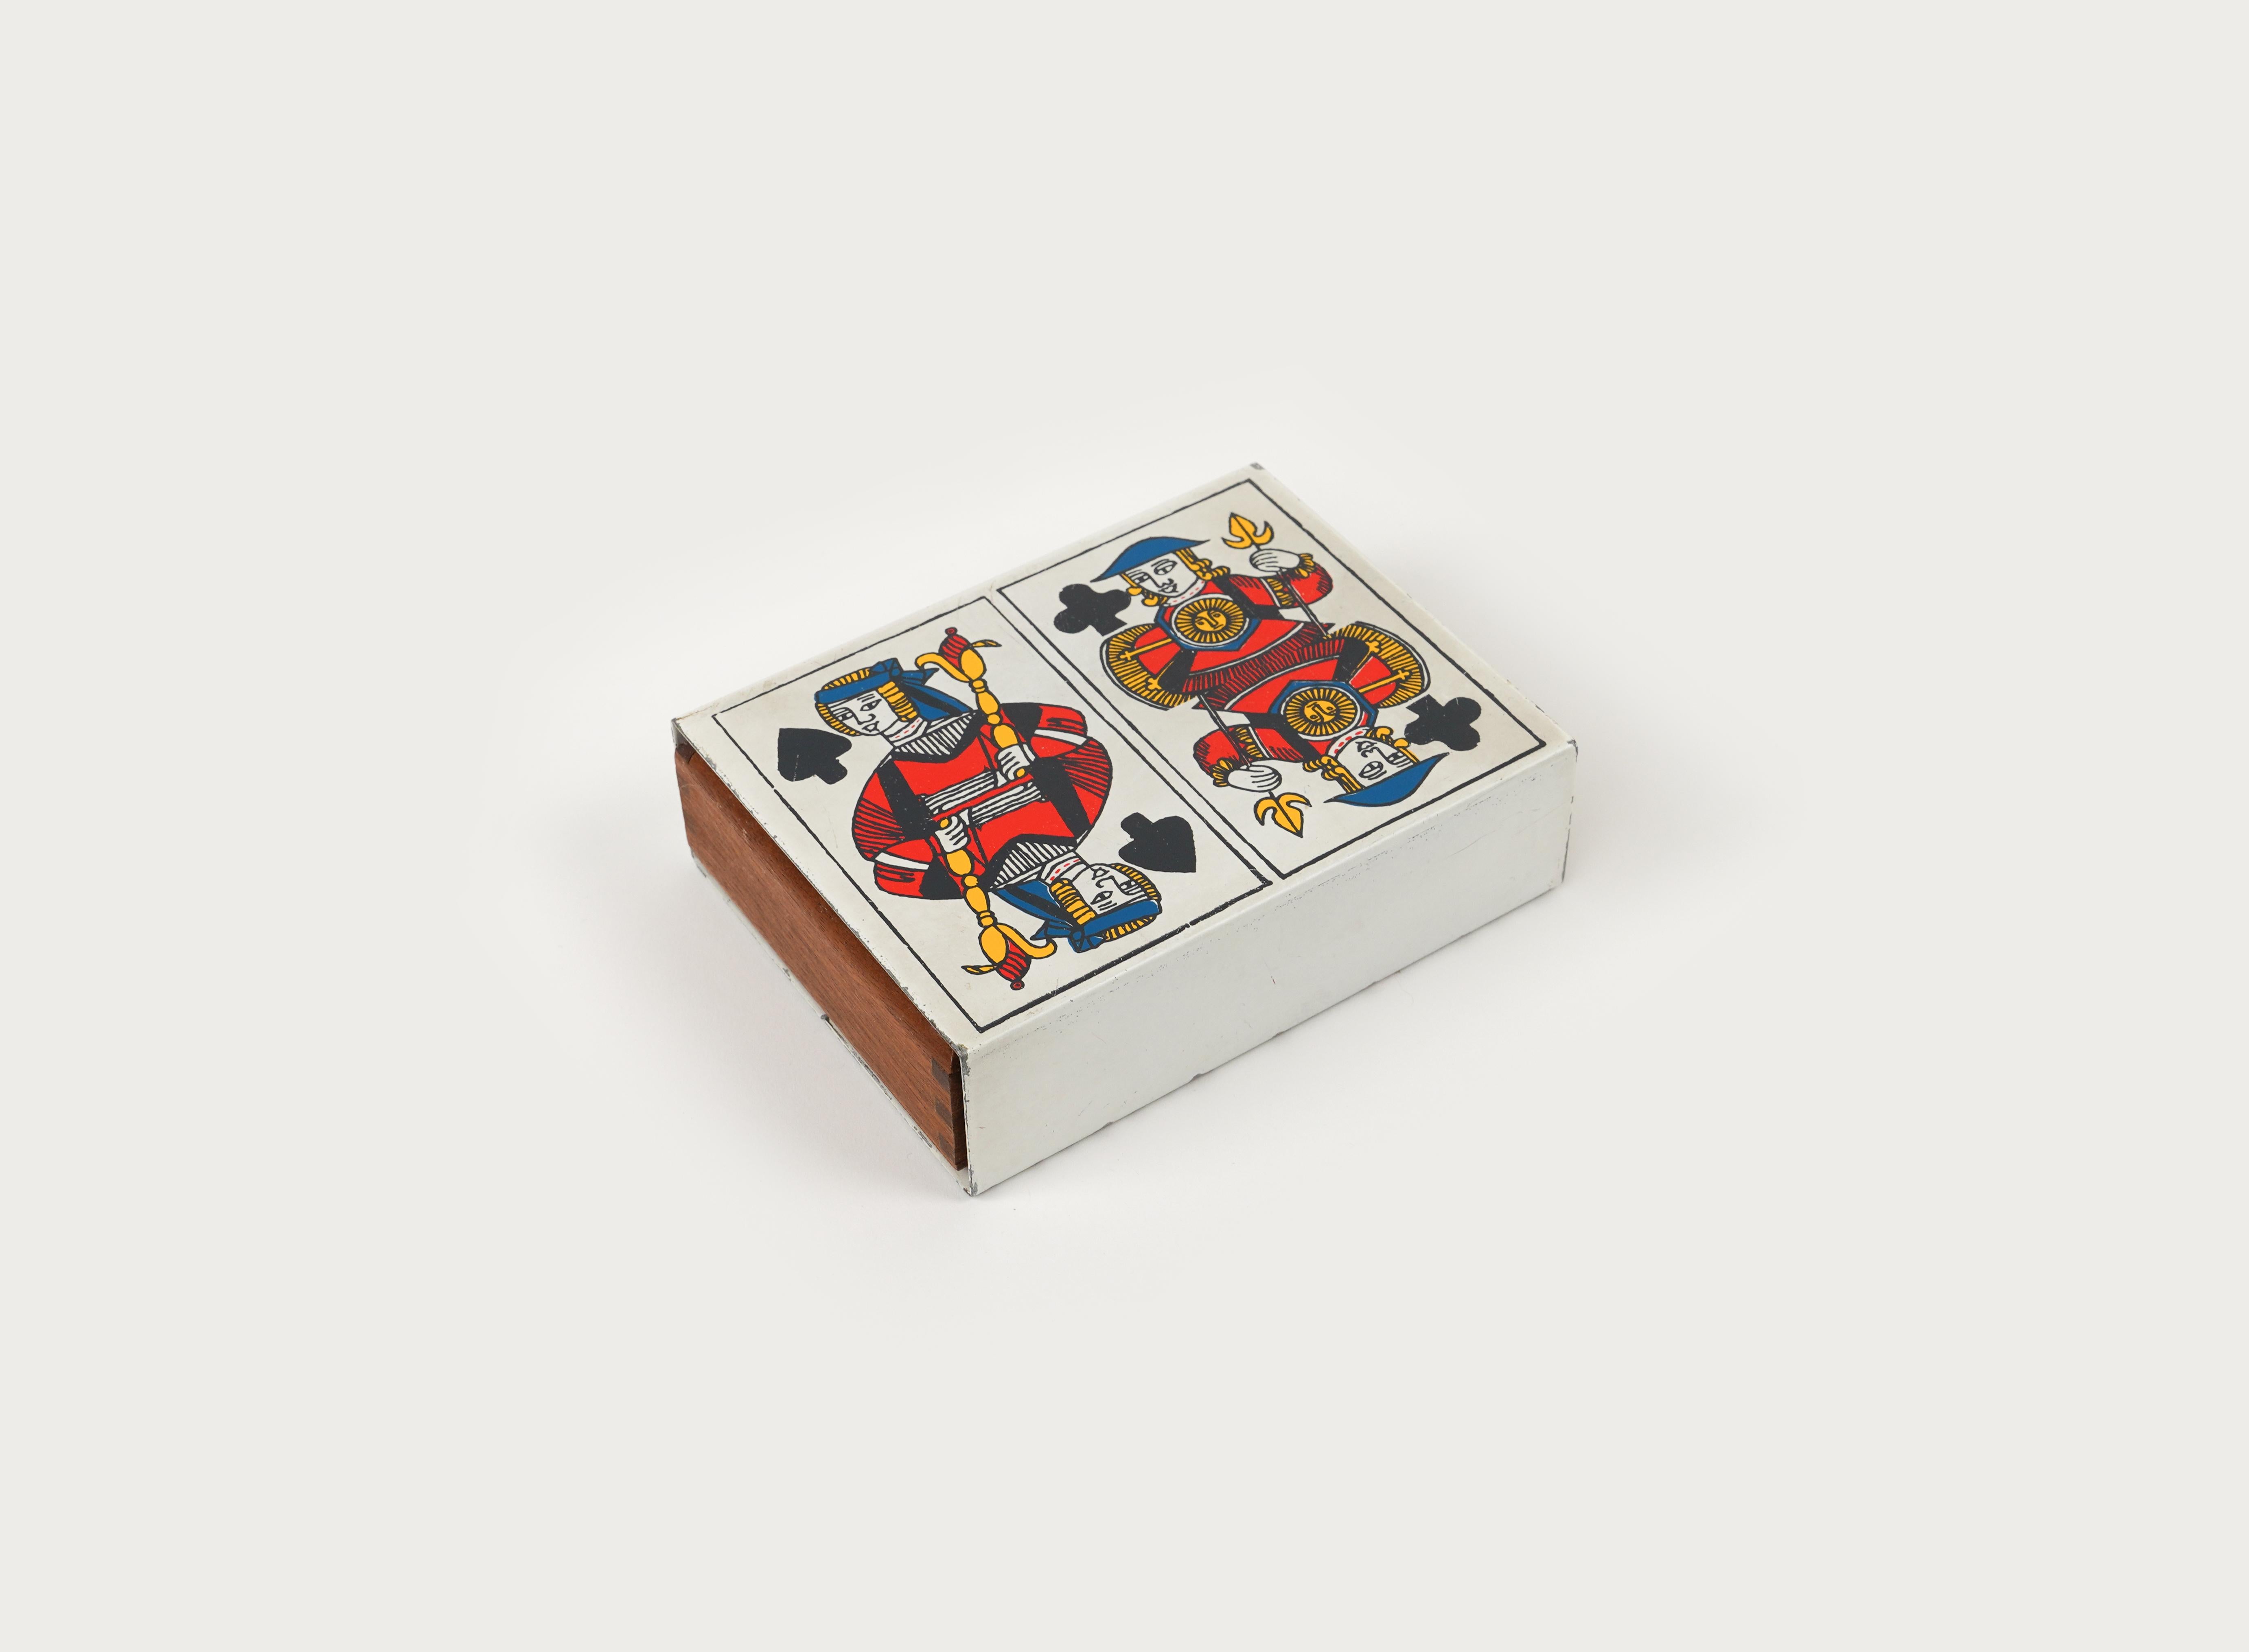 Midcentury beautiful decorative box by Piero Fornasetti.

It has a enameled metal cover with Fornasetti's iconic playing card motif and a wooden inner compartment with original felt bottom.

Made in Italy in the 1960s.

Perfect desk object or gift